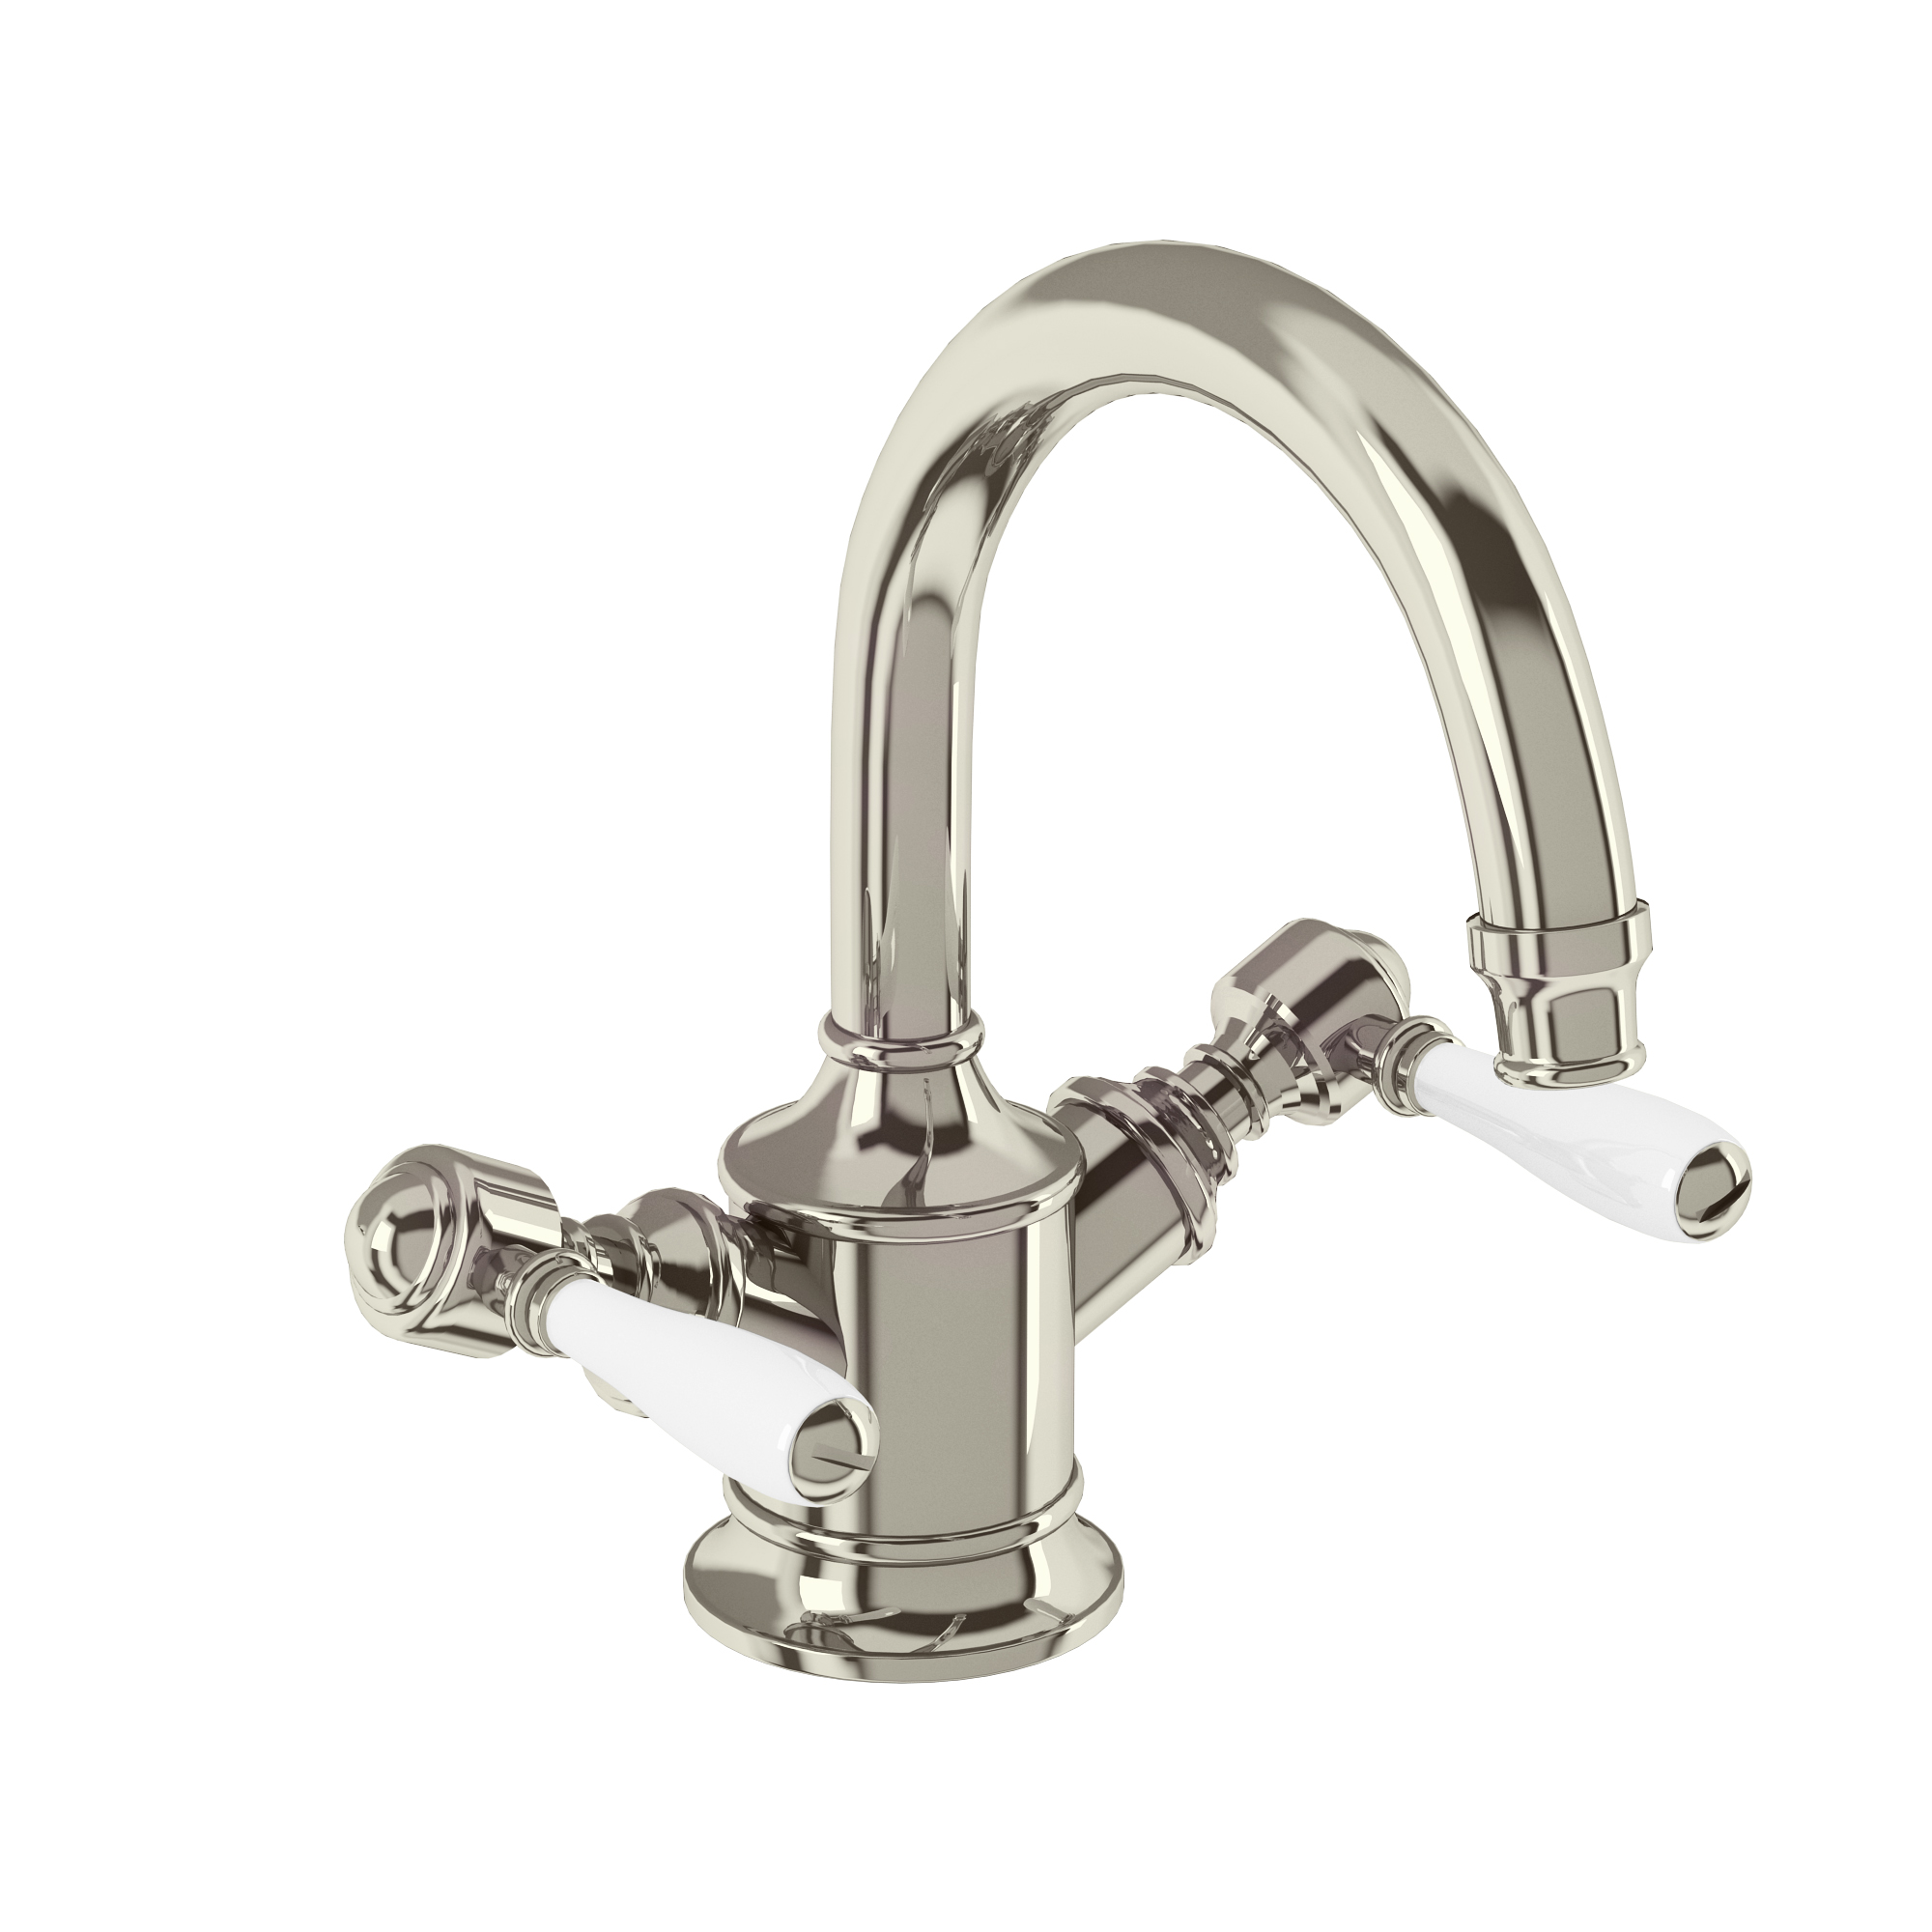 Arcade Dual-lever basin mixer without pop up waste - nickel - with ceramic lever